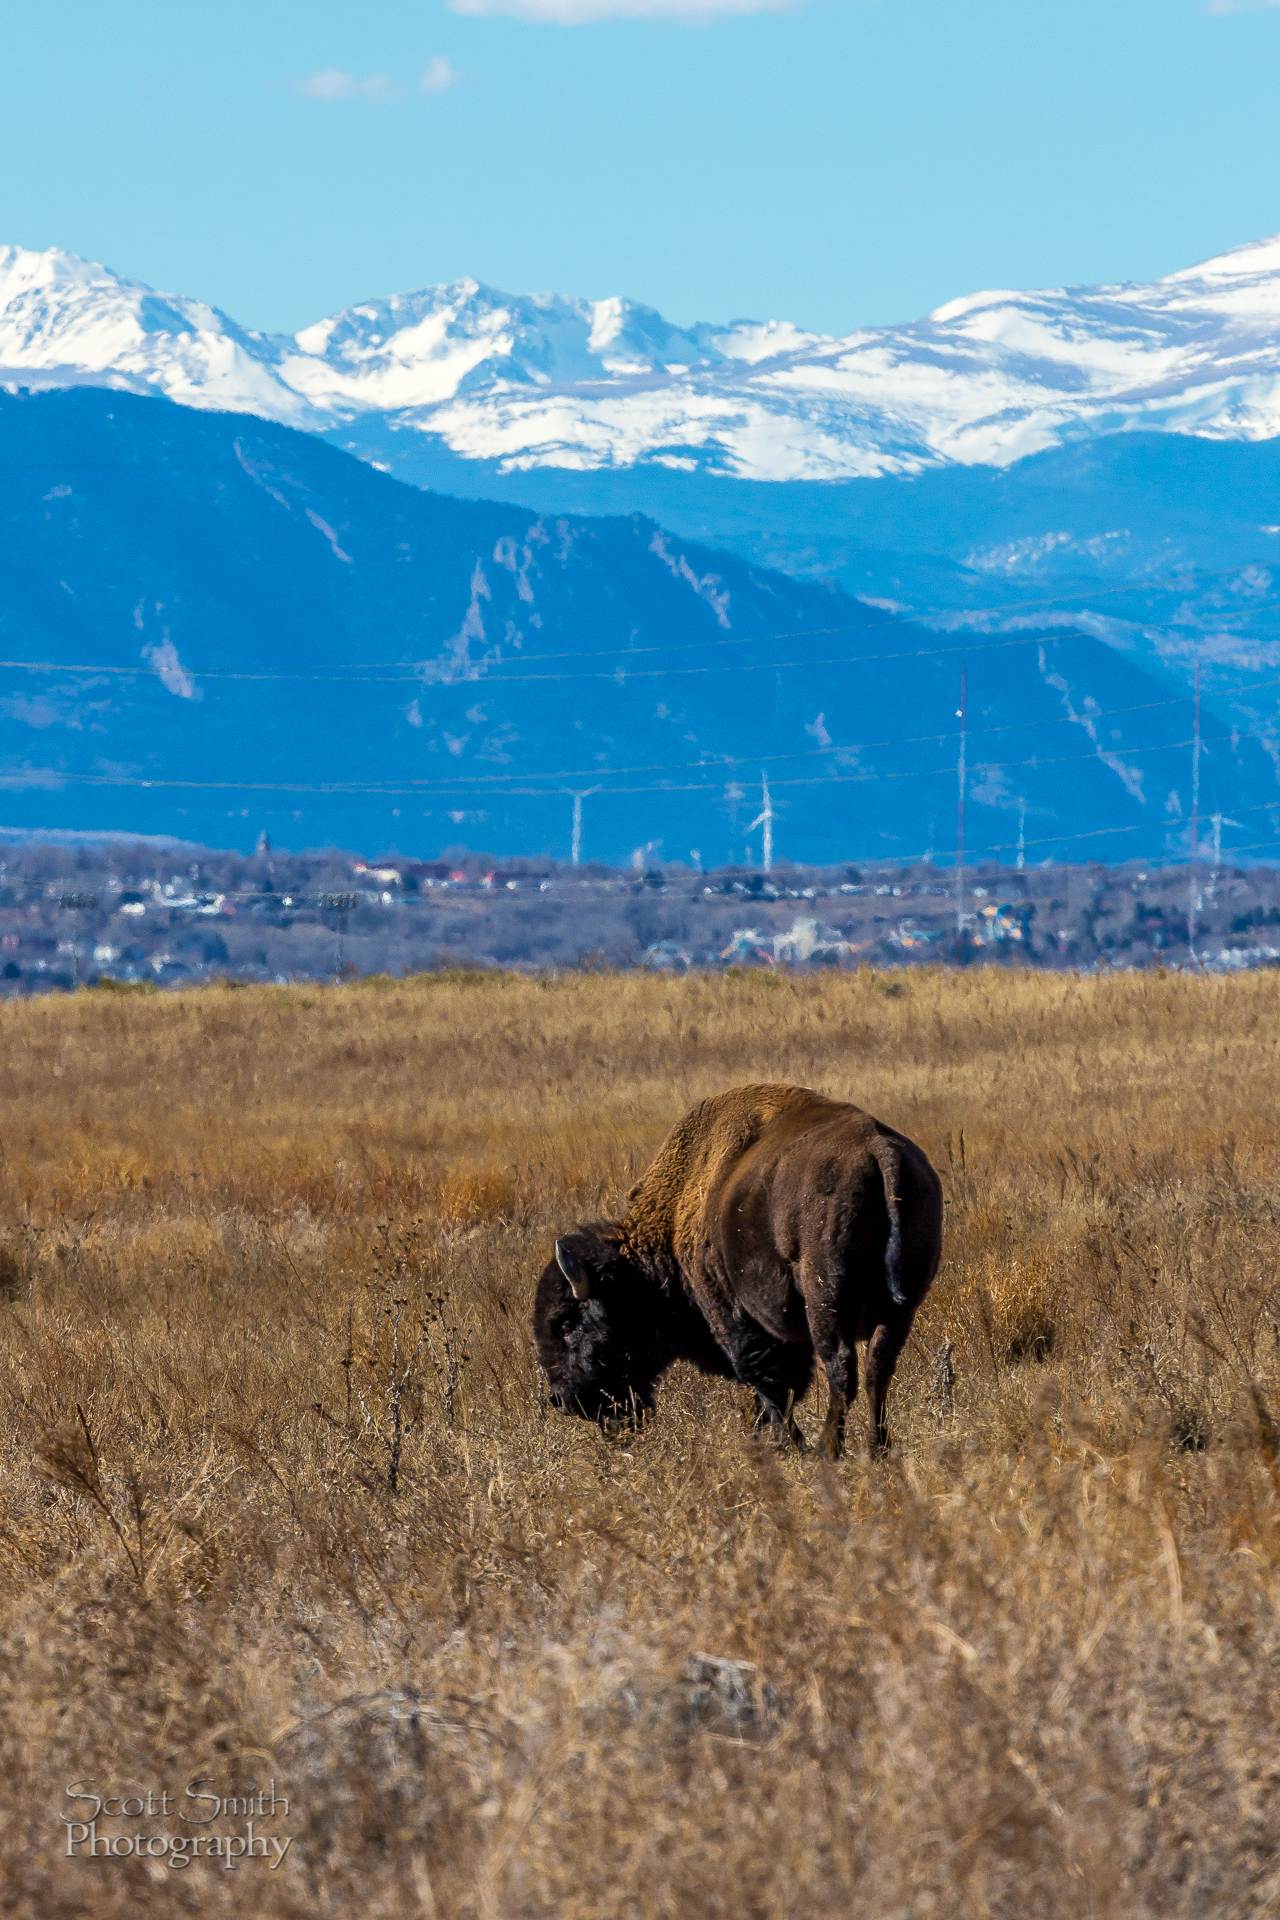 Bison 2 - The bison with Rocky Flats and the wind generators near Boulder Colorado in the distance. by Scott Smith Photos